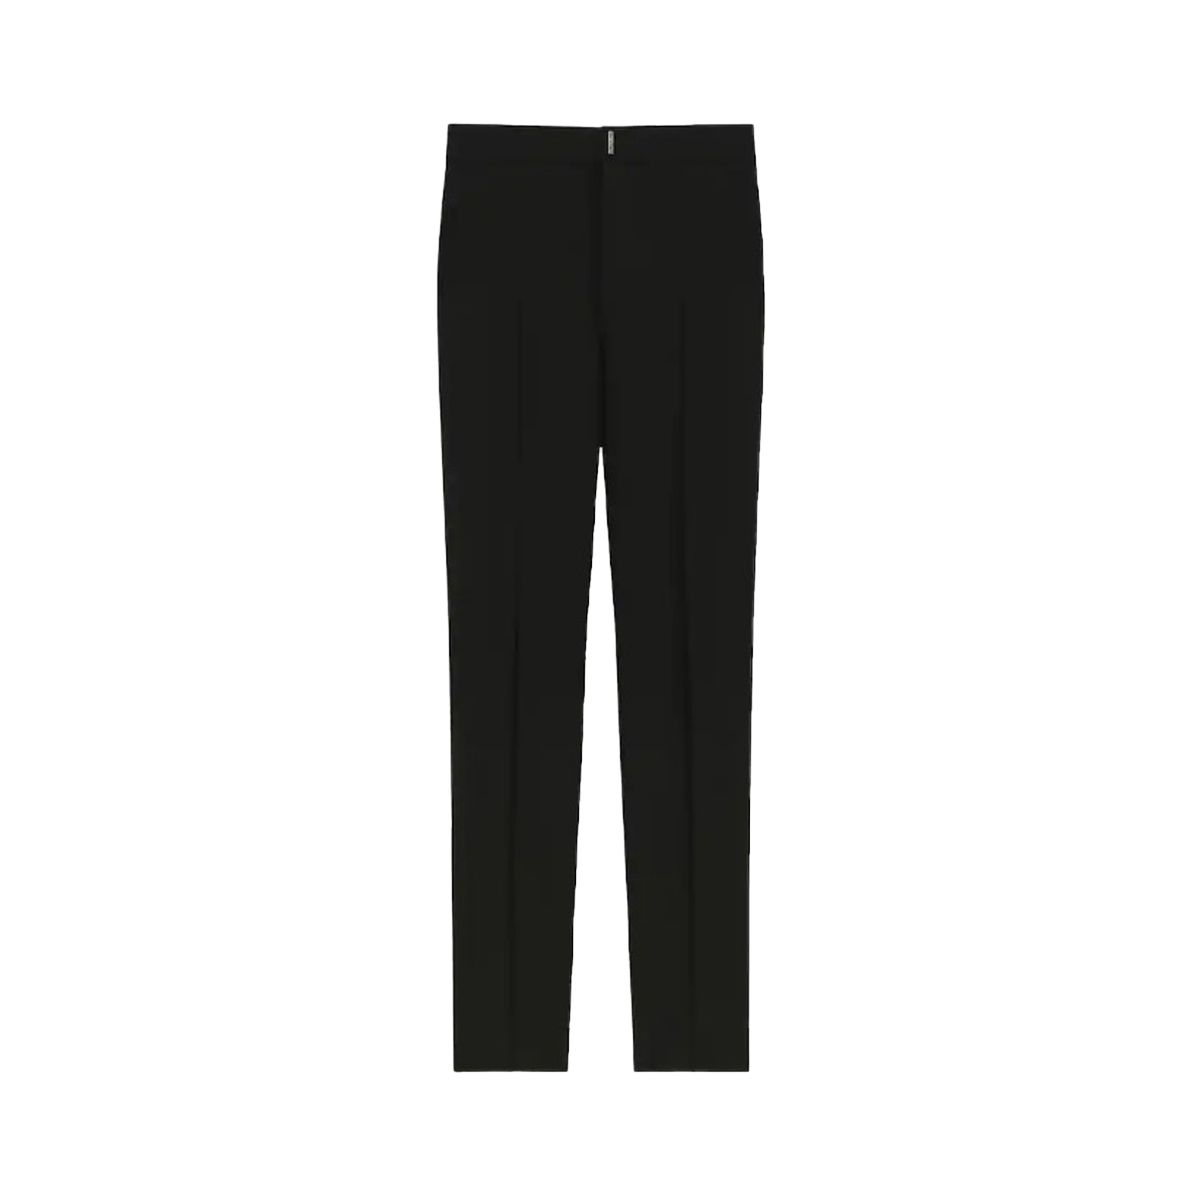 Black Tailored Wool Trousers